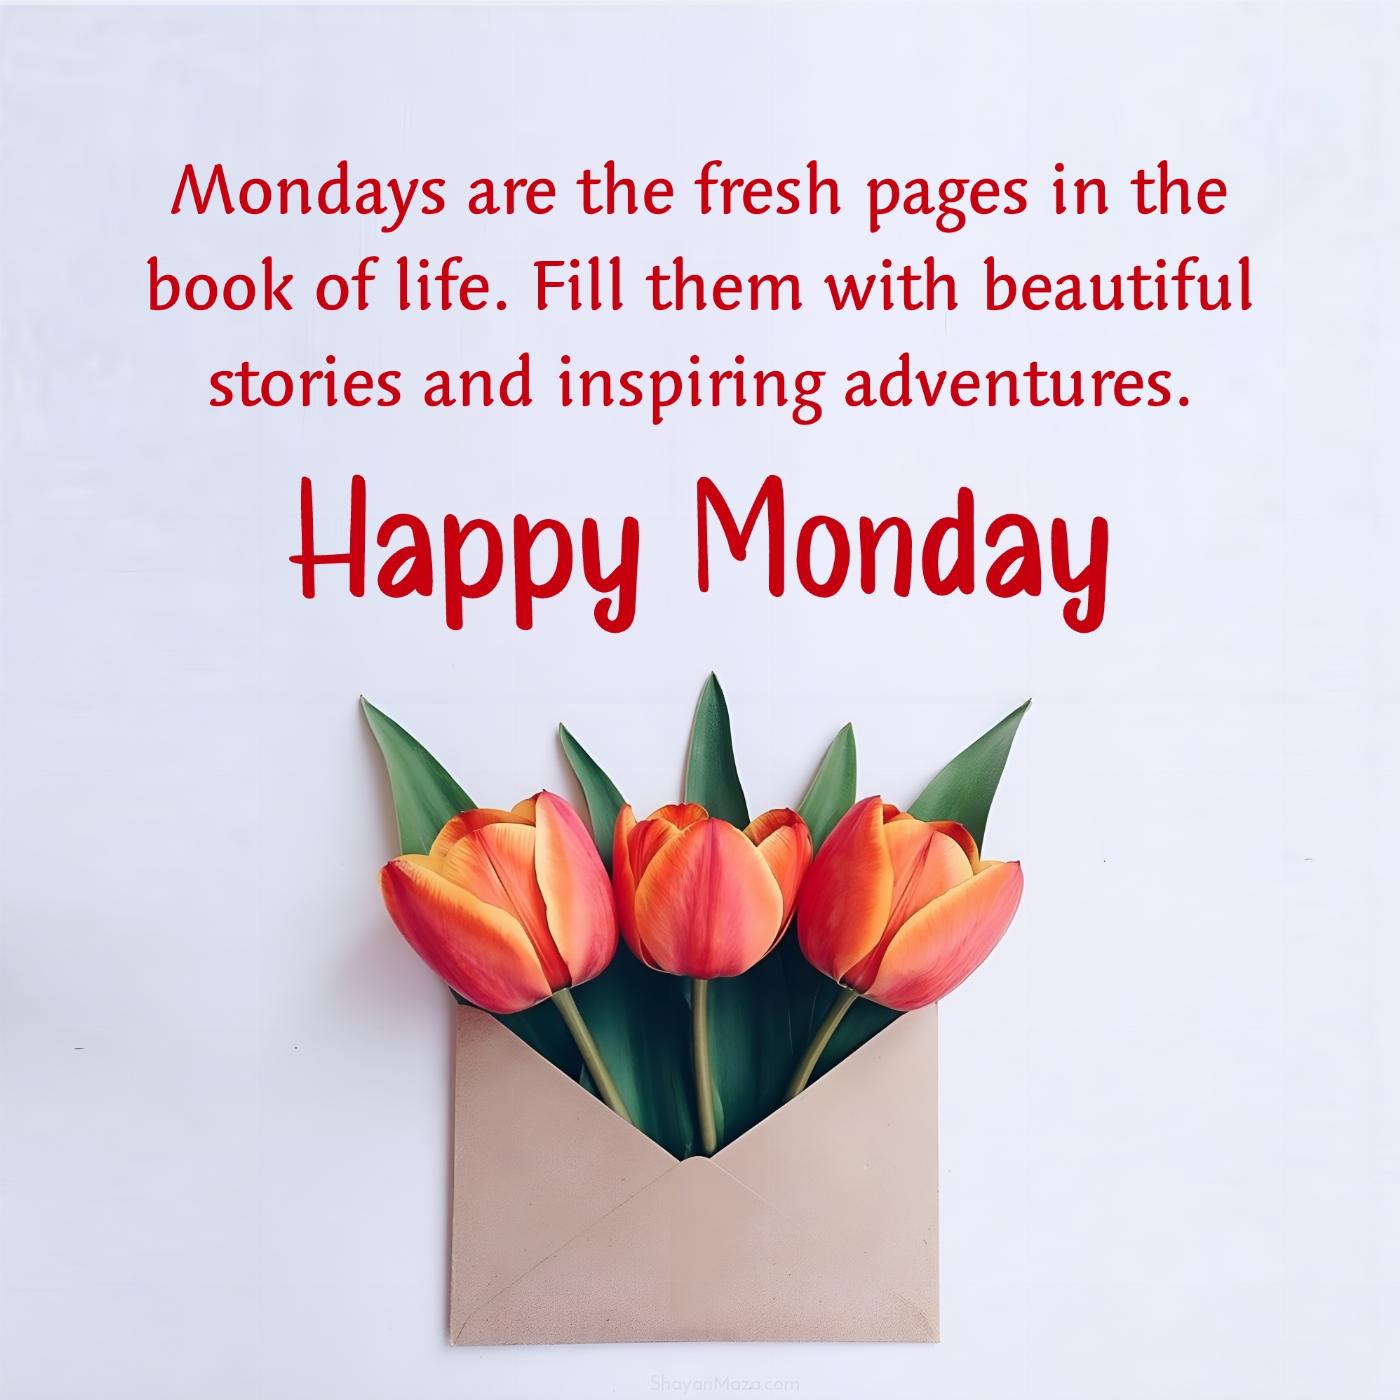 Mondays are the fresh pages in the book of life